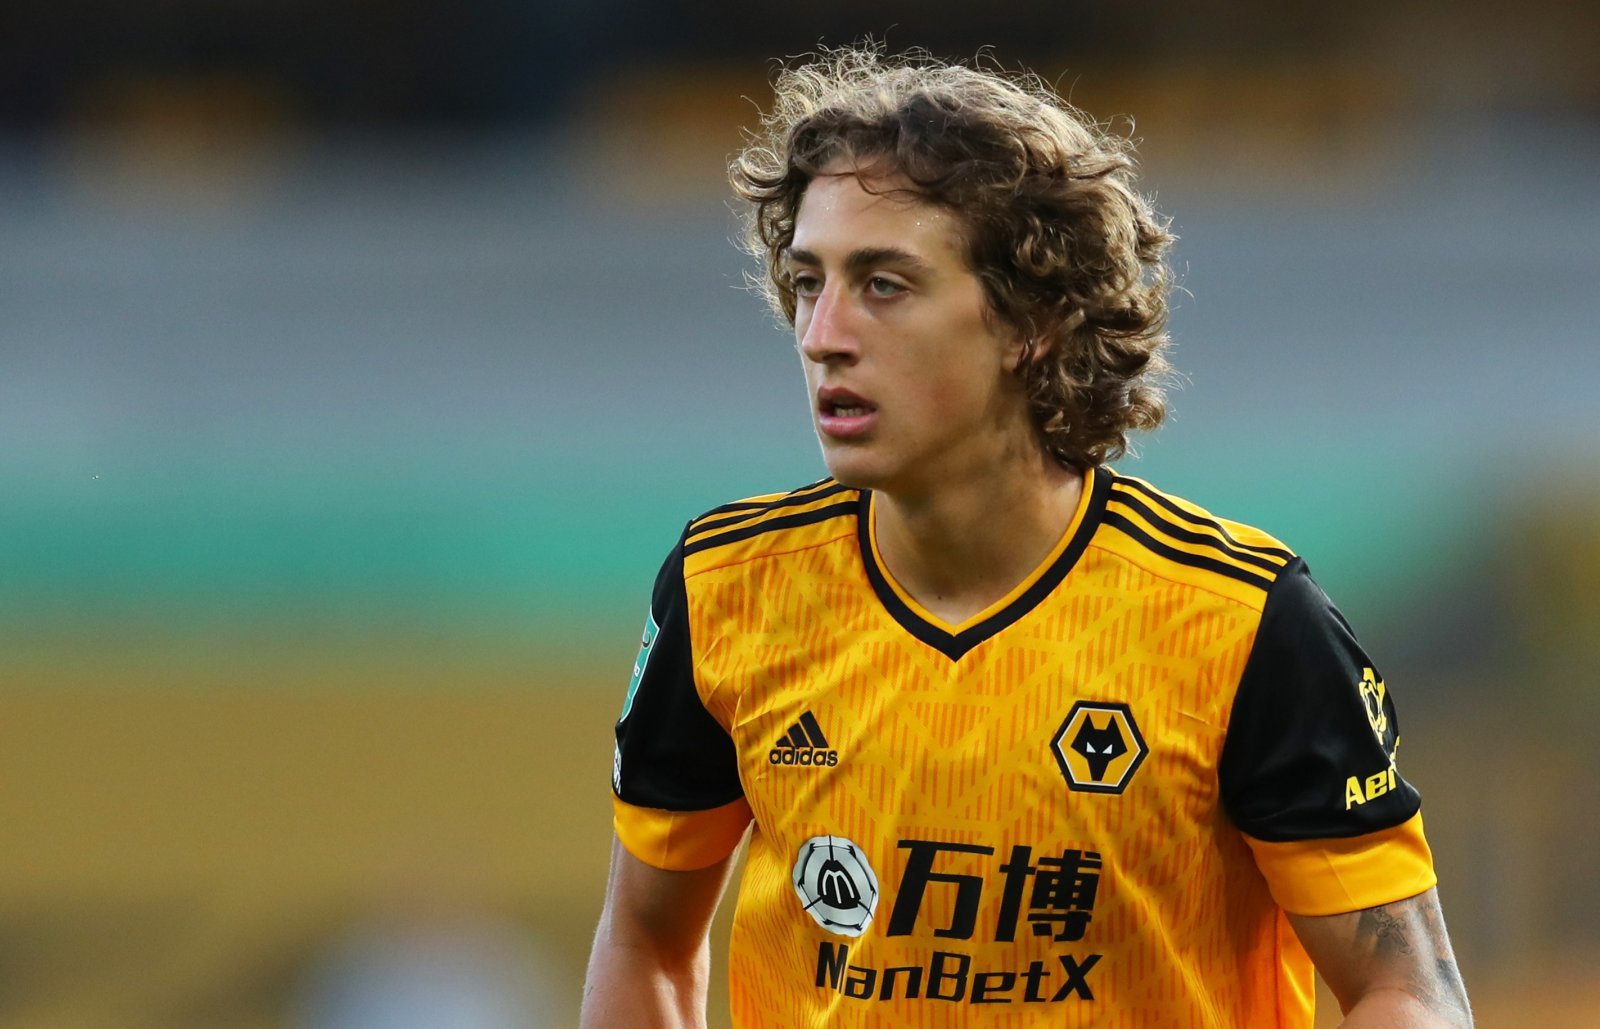  Fabio Silva, a Portuguese professional footballer who plays as a forward for Premier League club Wolverhampton Wanderers and the Portugal national team, is seen here playing soccer for Wolverhampton Wanderers.